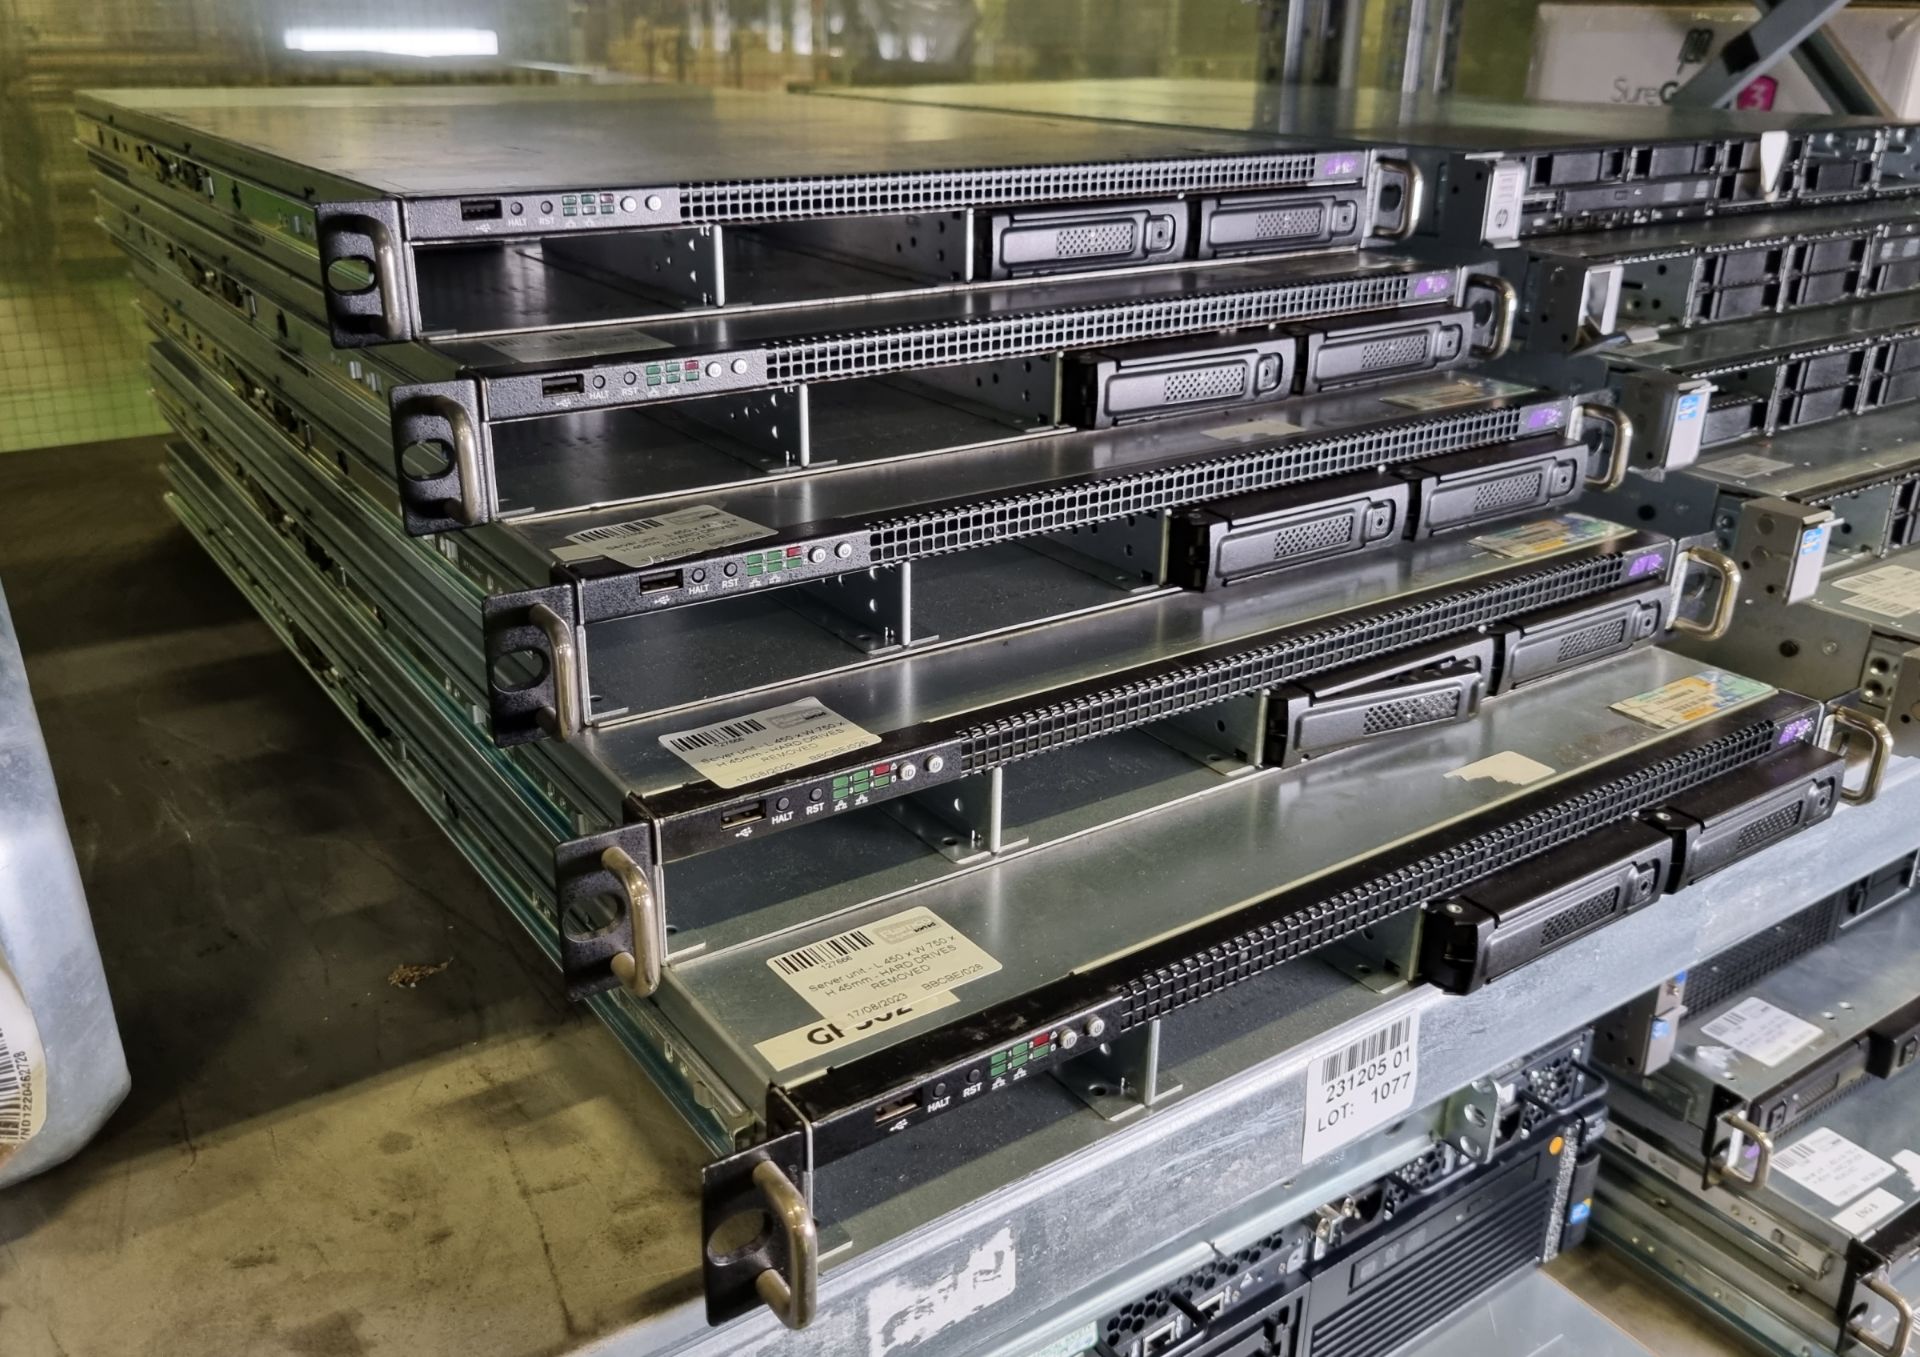 5x Server units - L 750x W 450 x H 45mm - HARD DRIVES REMOVED - Image 2 of 5